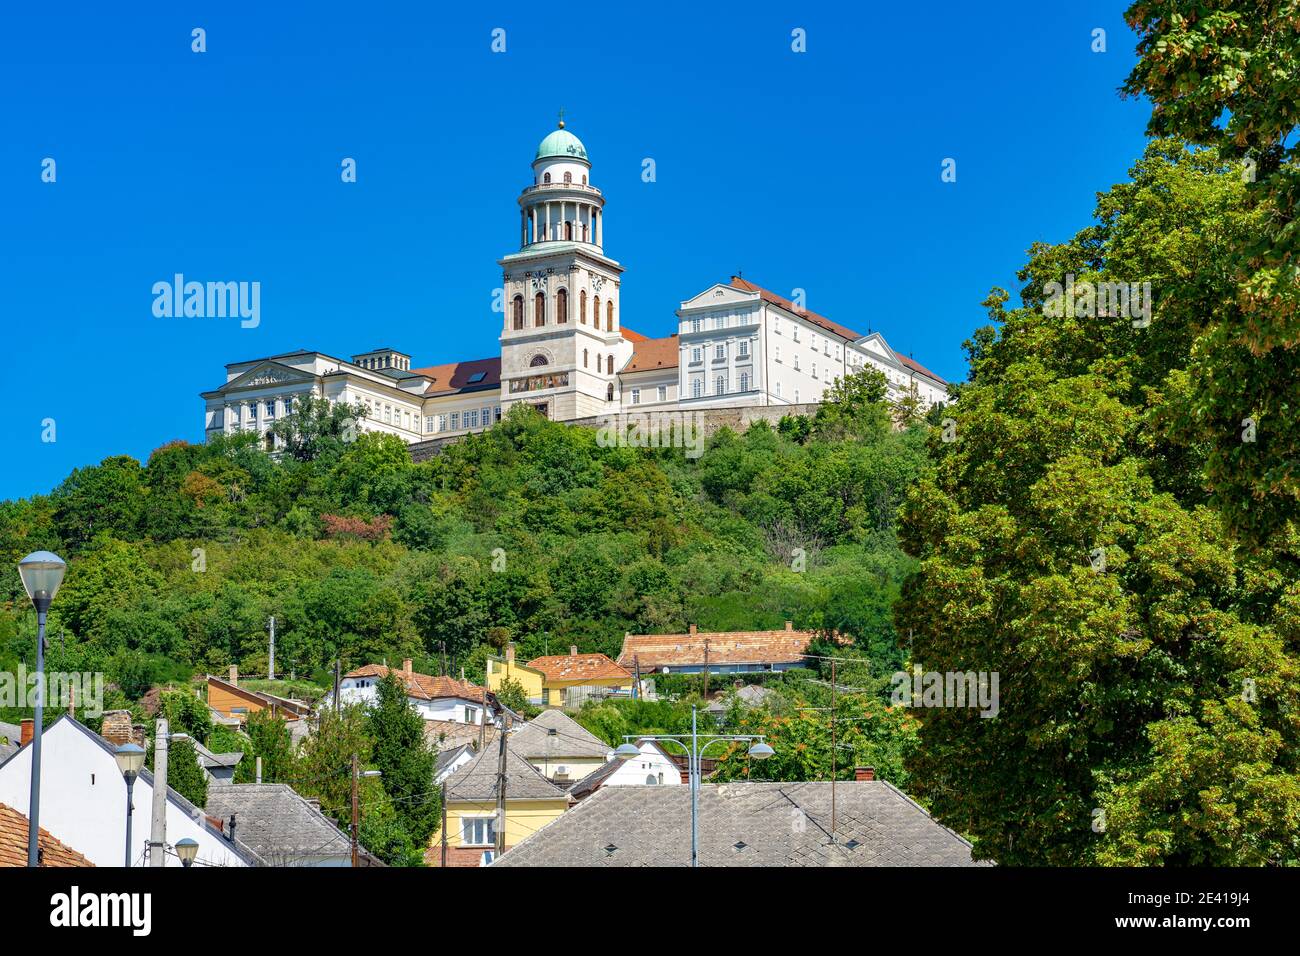 Pannonhalma arch abbey on the hill with old houses around it in Hungary Stock Photo